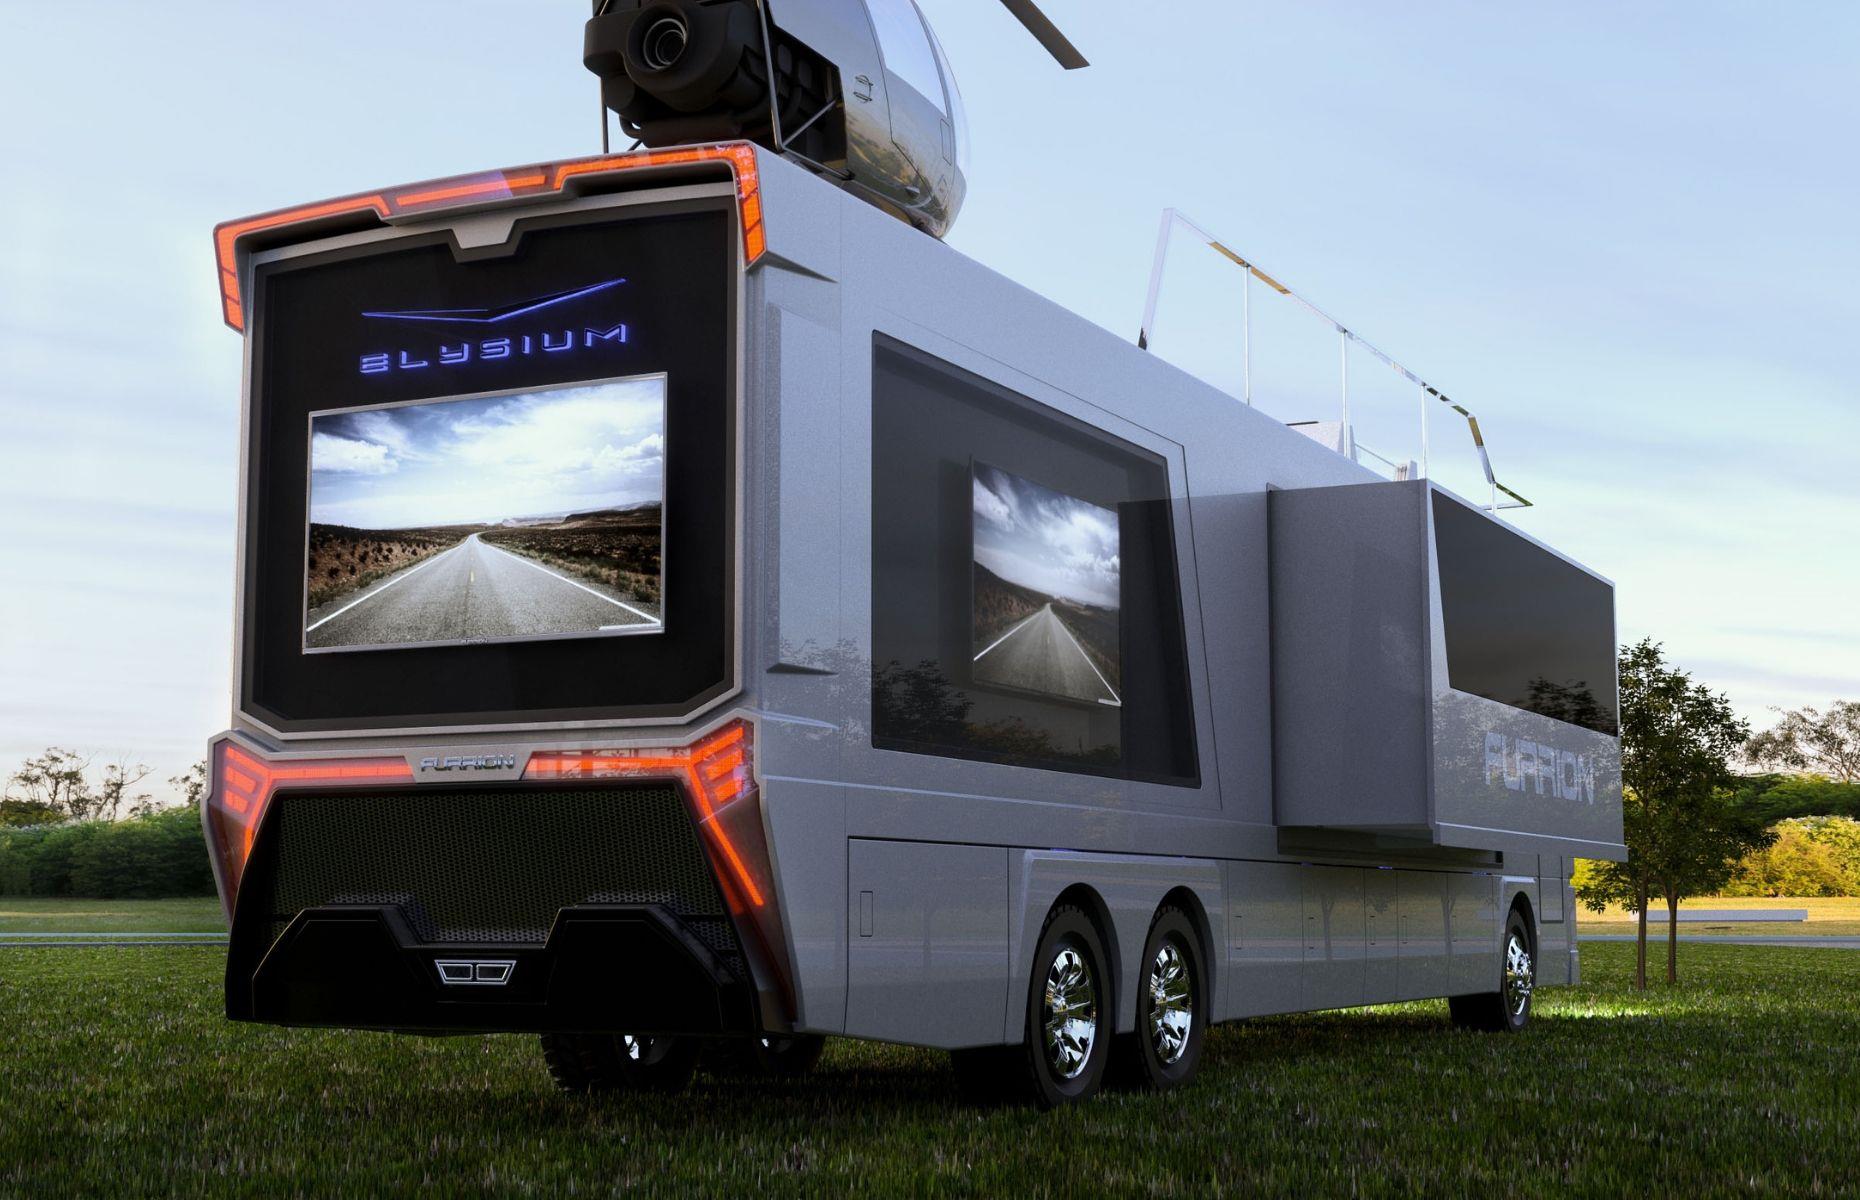 <p>As a leader in luxury products for recreational vehicles, Furrion knows a thing or two about living your best life on the move. Created to promote the company's extensive range of high-end appliances and entertainment systems, the impressive 45-foot-long vehicle is outfitted with the latest smart living solutions.</p>